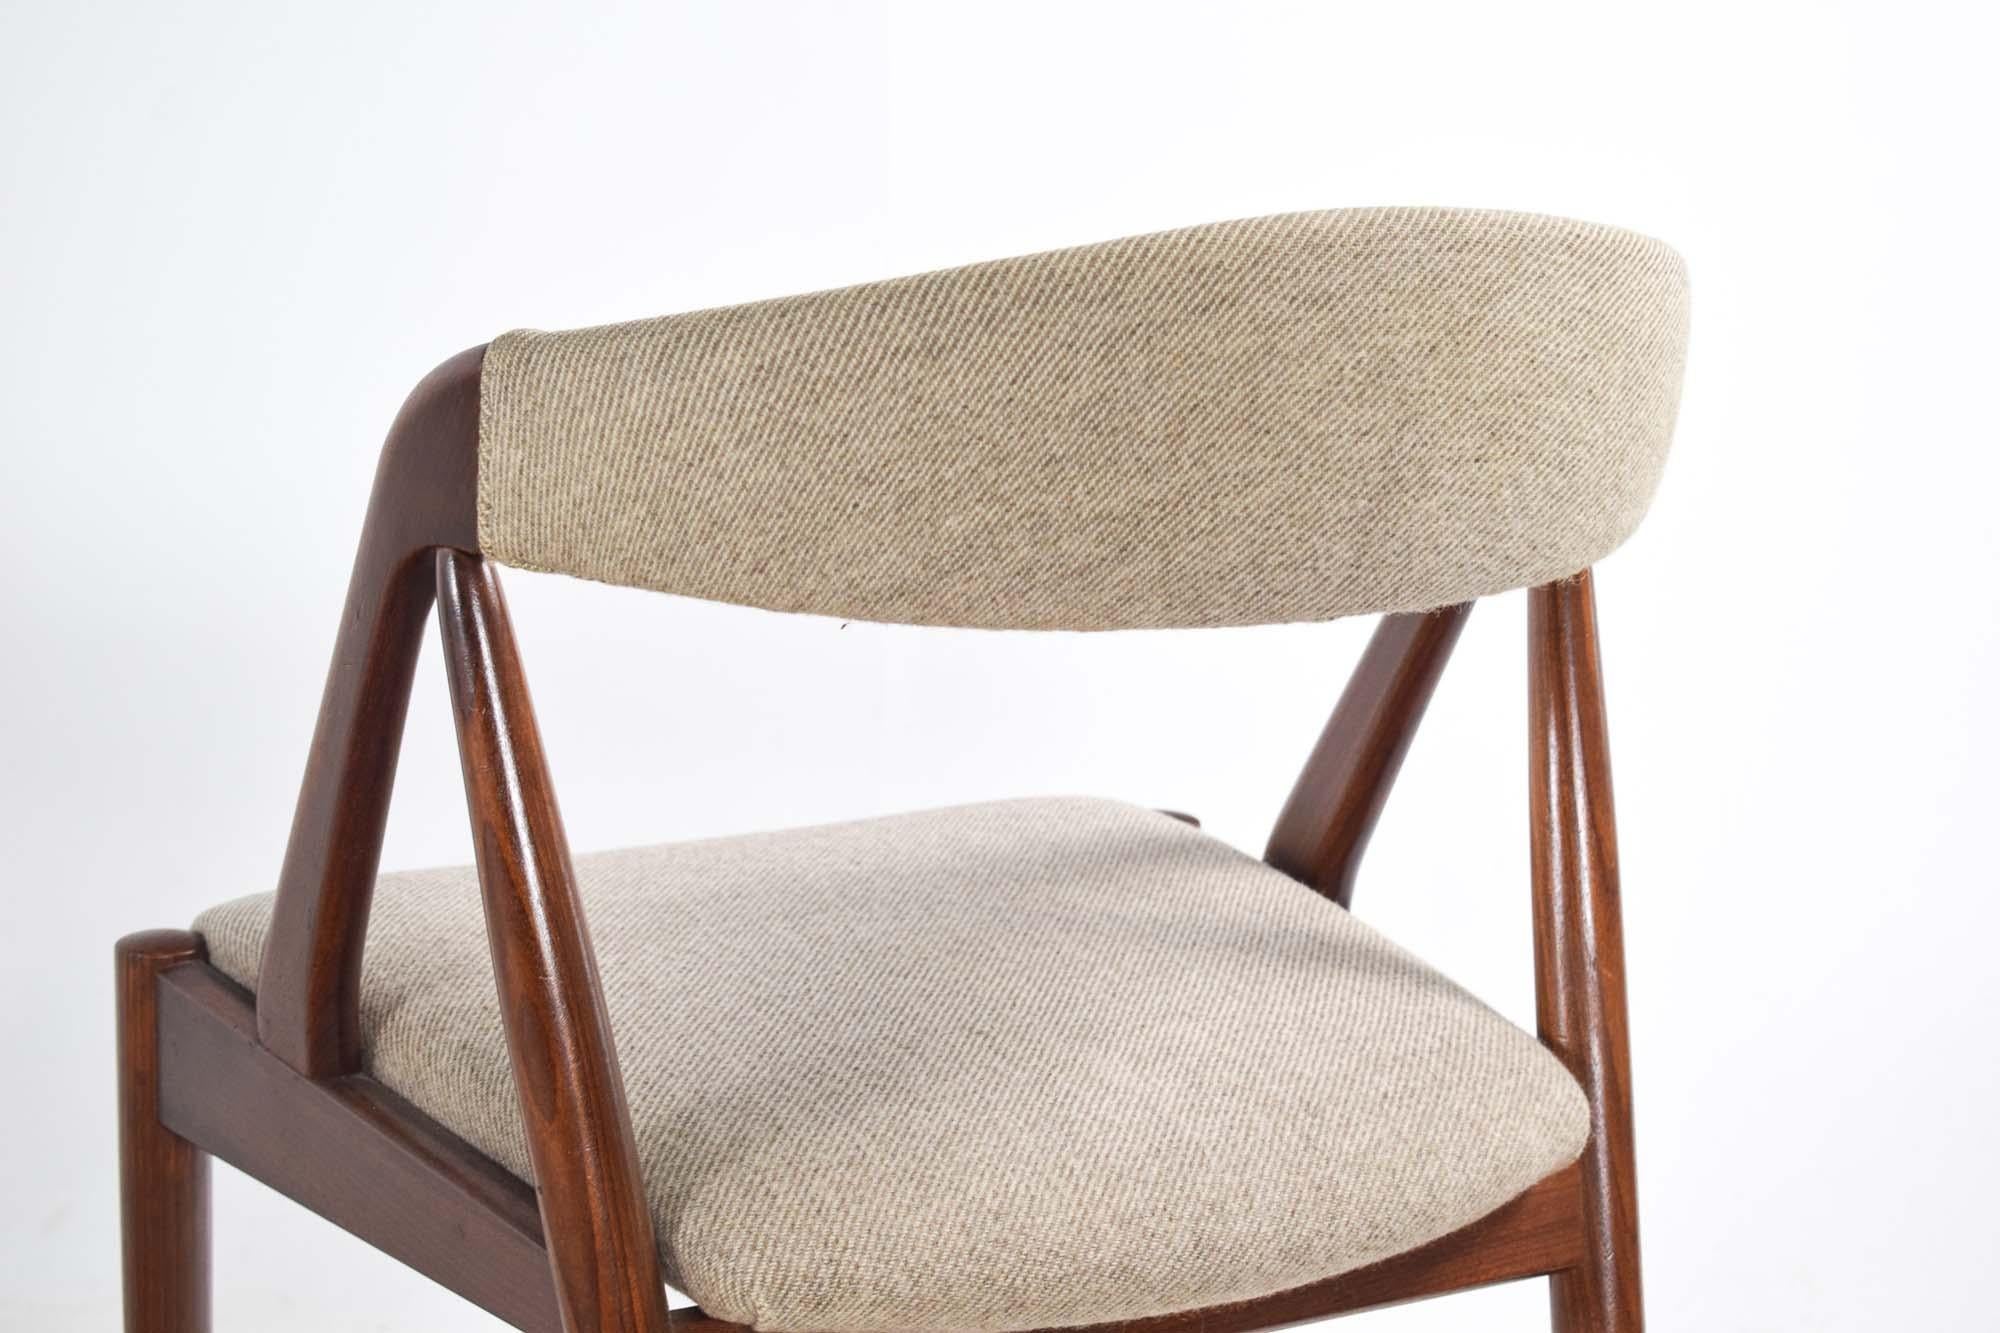 This set of four dining chairs by Kai Kristiansen, Model 31, epitomizes the timeless elegance and comfort of Danish mid-century design. Crafted in 1960, these chairs showcase the distinctive aesthetic and exceptional craftsmanship that define